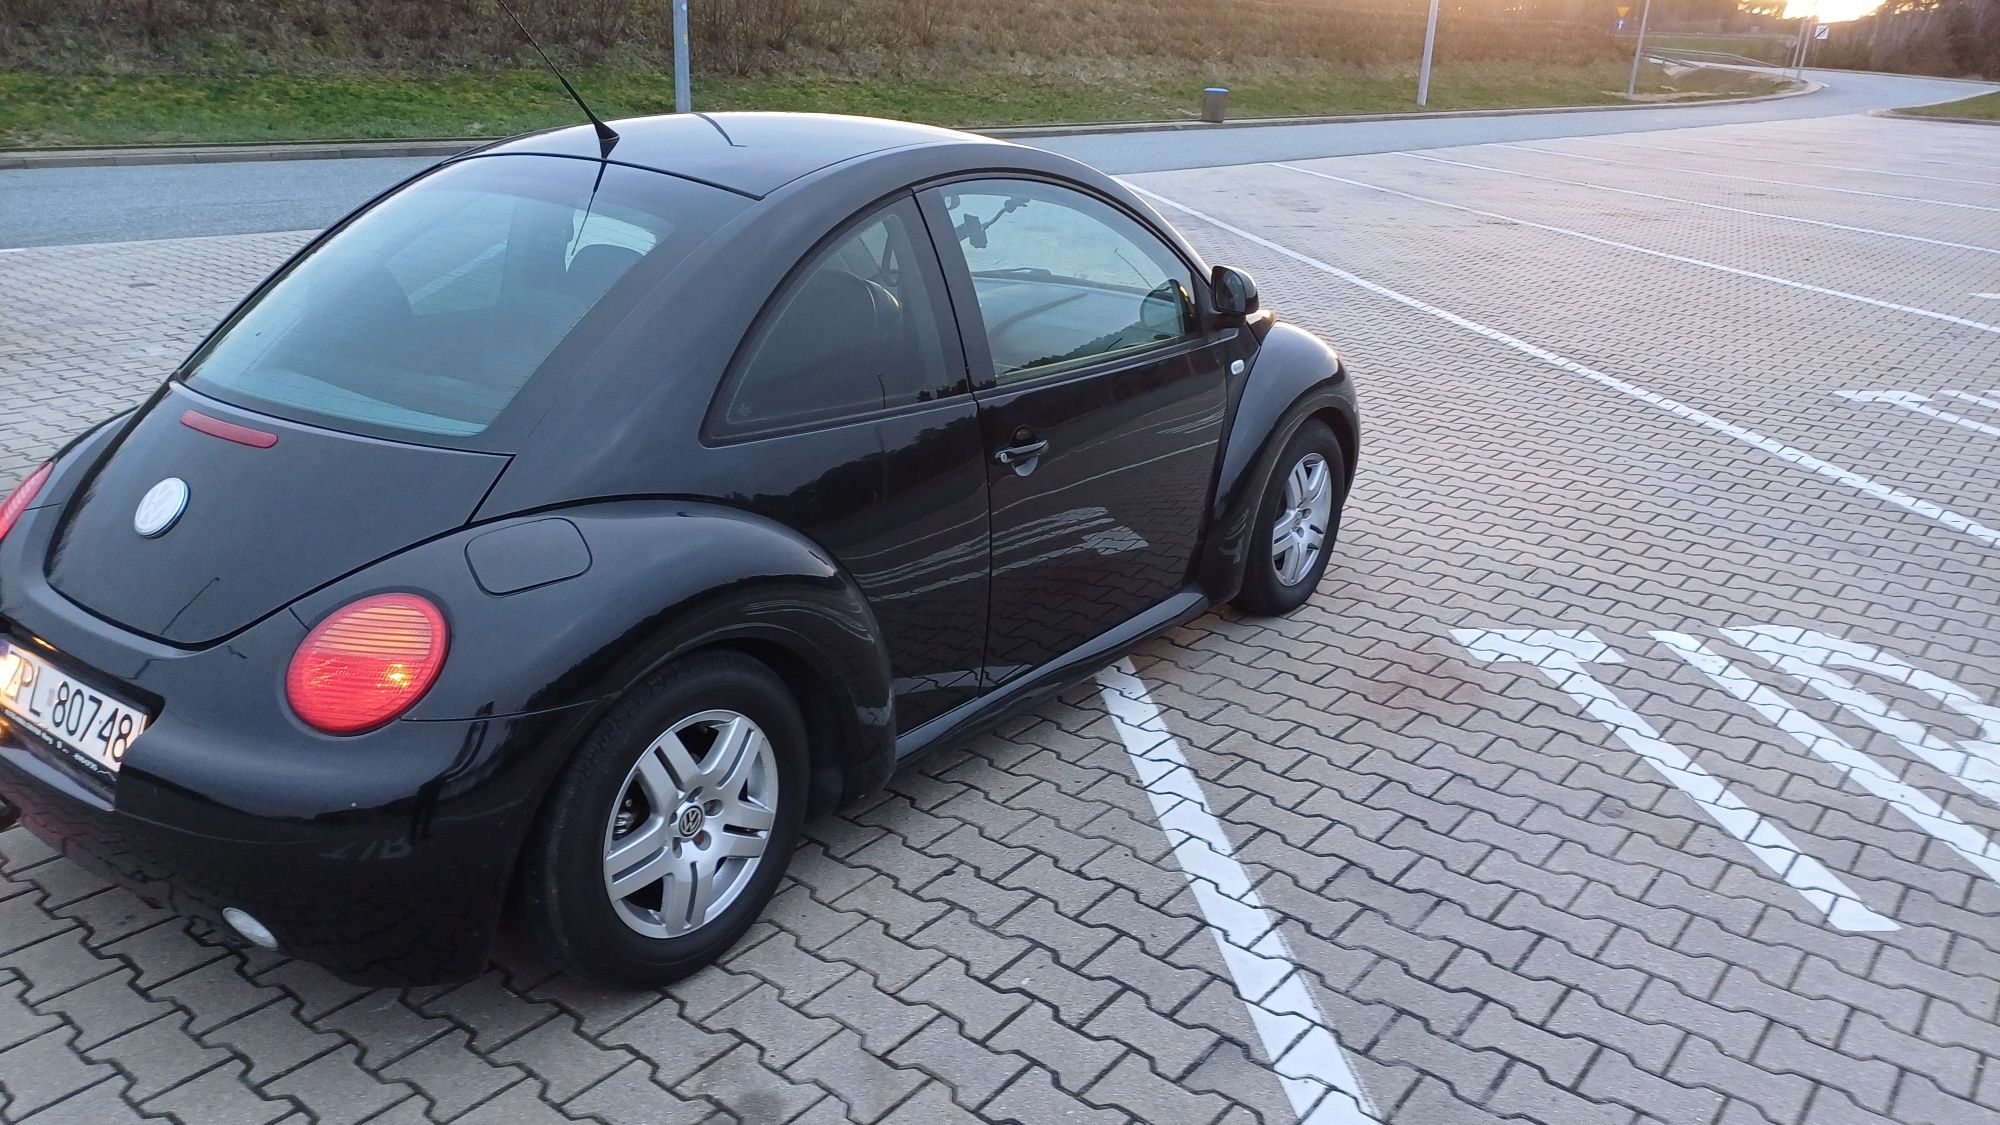 WV new Beetle 2.0 benzyna 99 rok